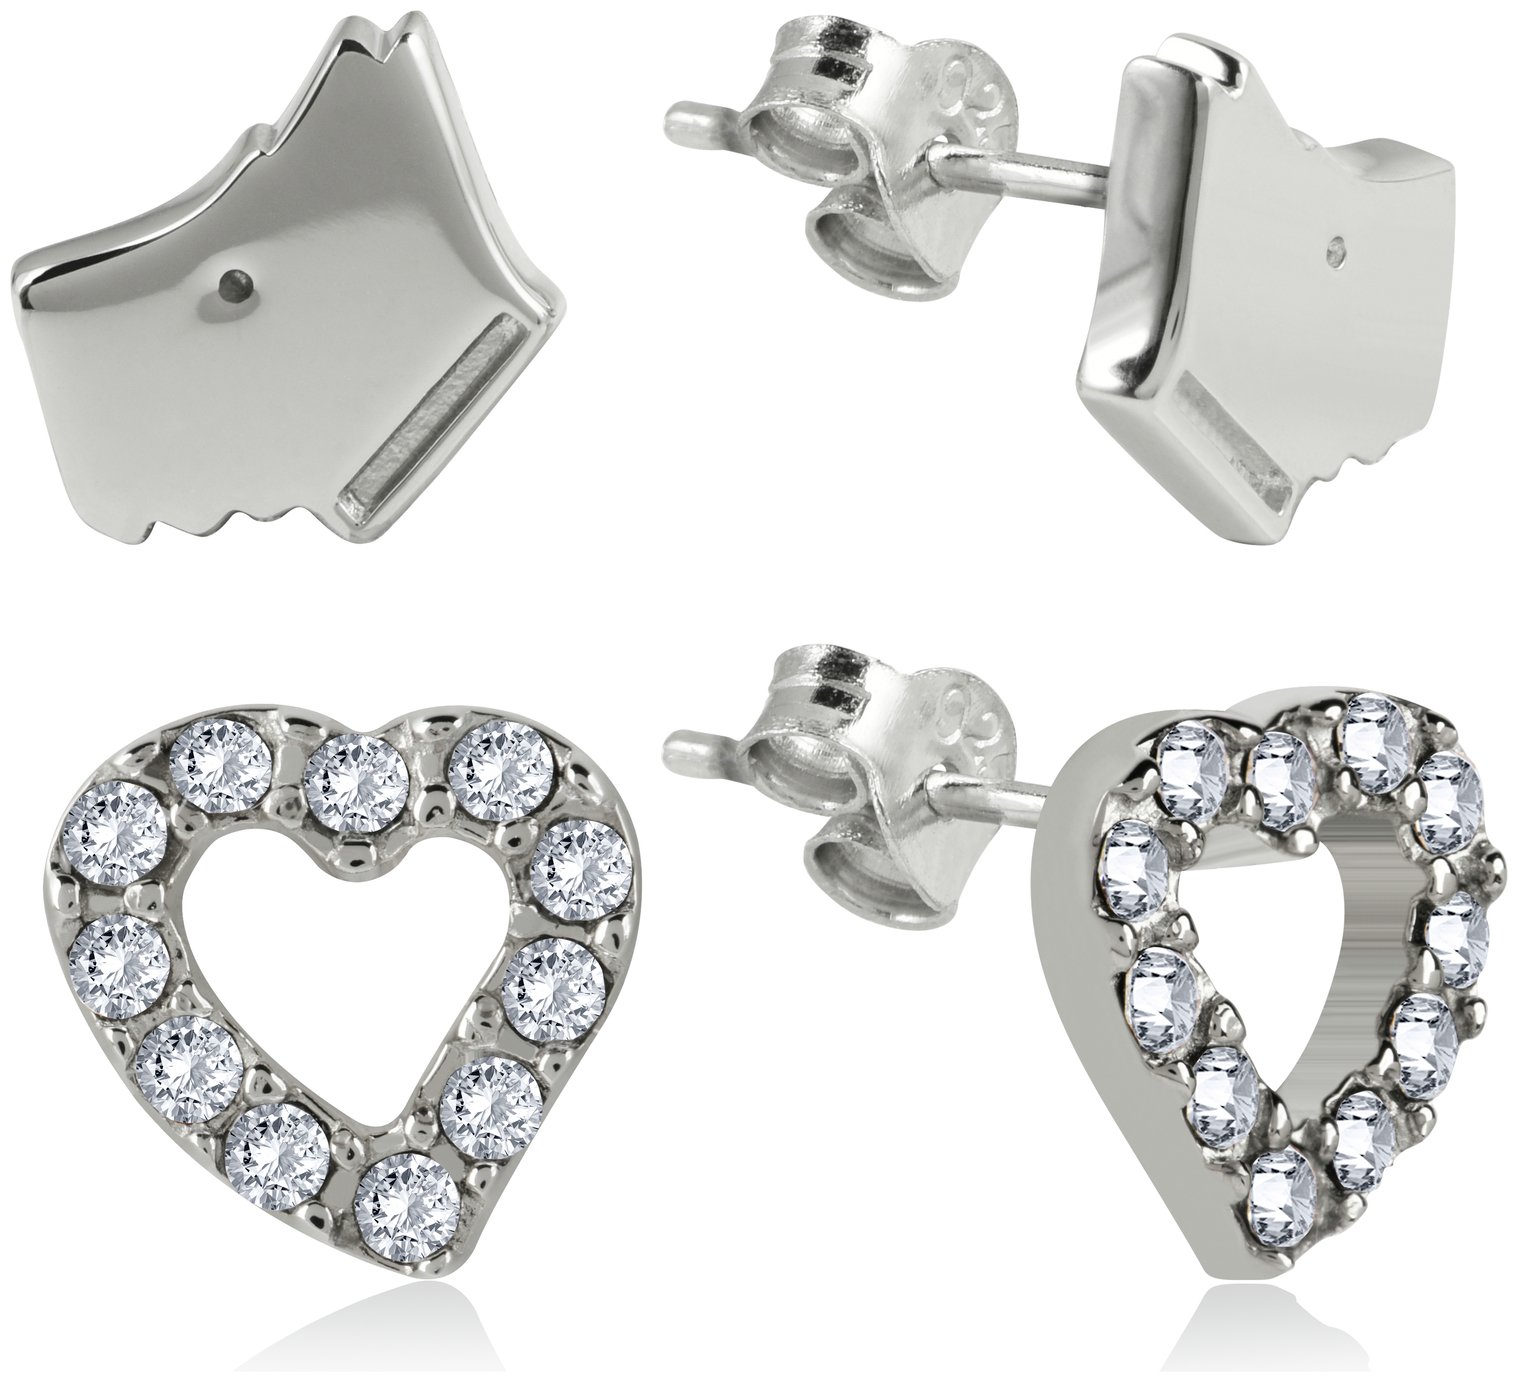 Radley Sterling Silver Dog and Heart Earrings Review